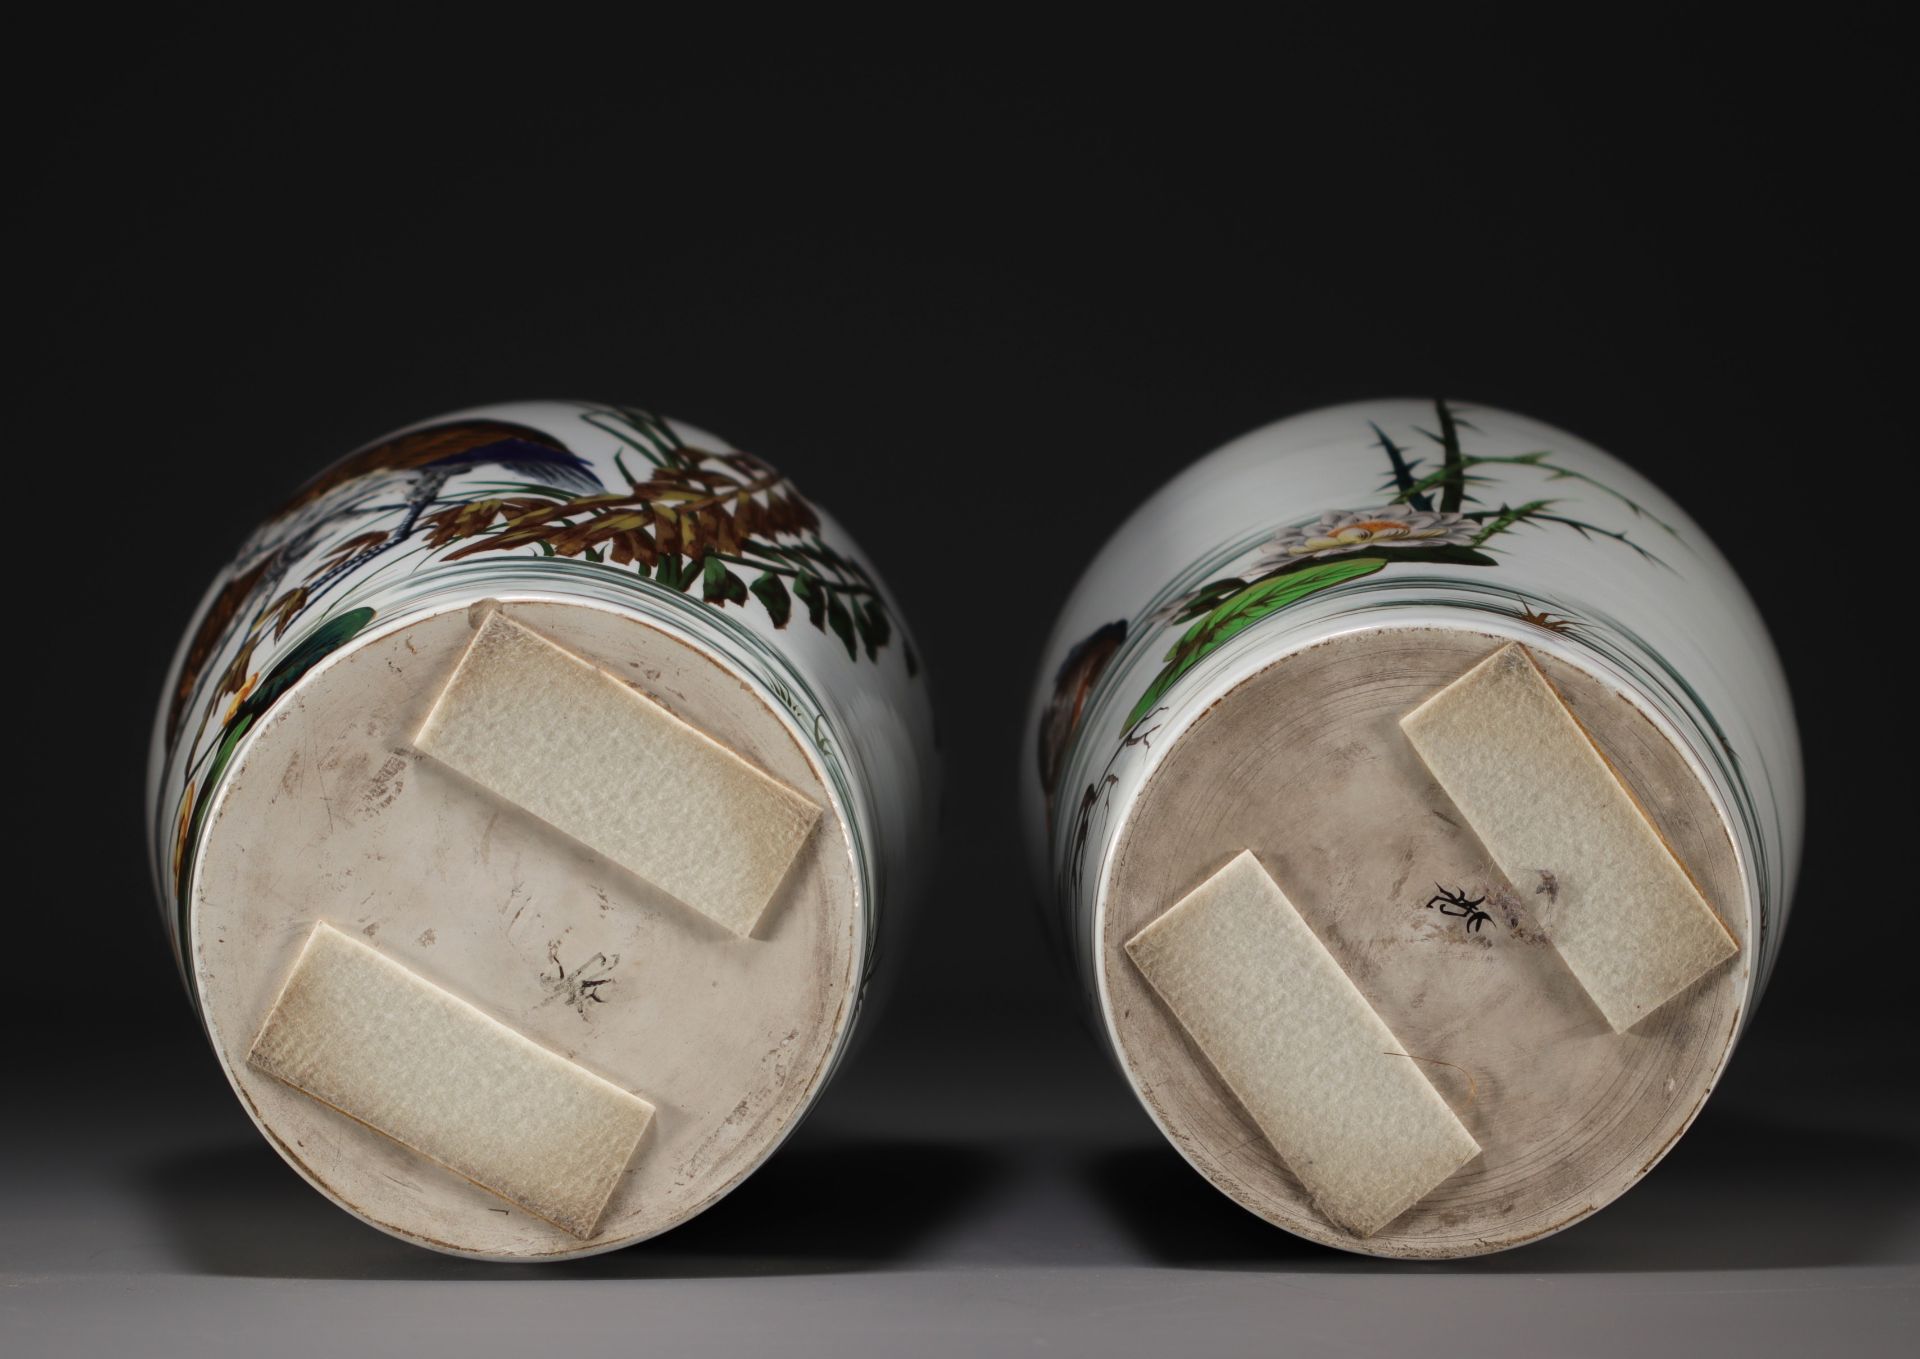 Taxile DOAT (1851-1938) - Pair of Japanese porcelain vases decorated with birds, circa 1900. - Image 5 of 5